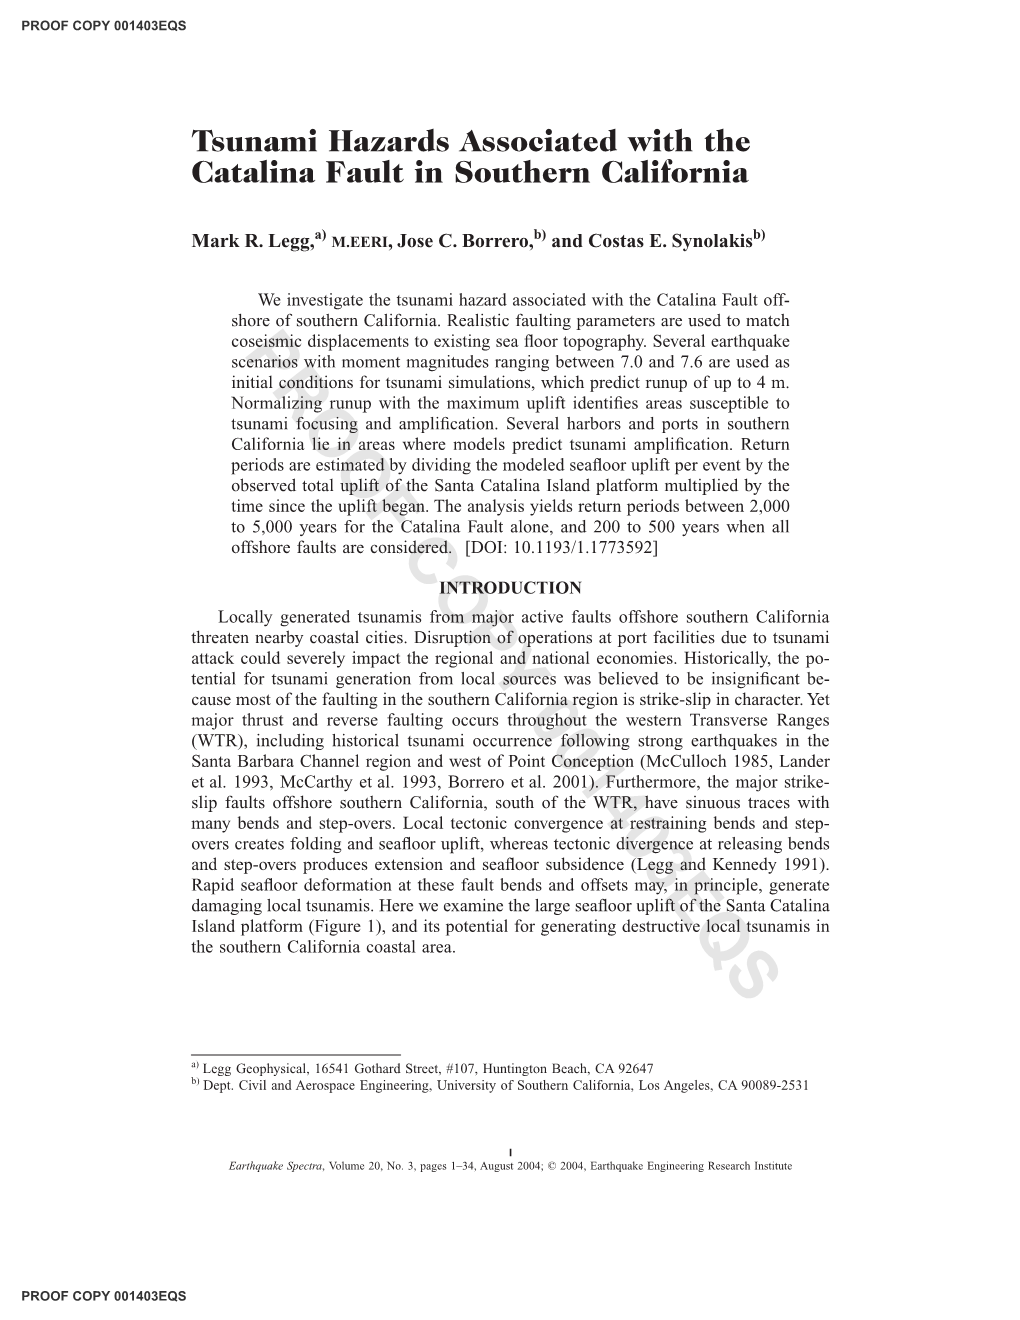 Tsunami Hazards Associated with the Catalina Fault in Southern California